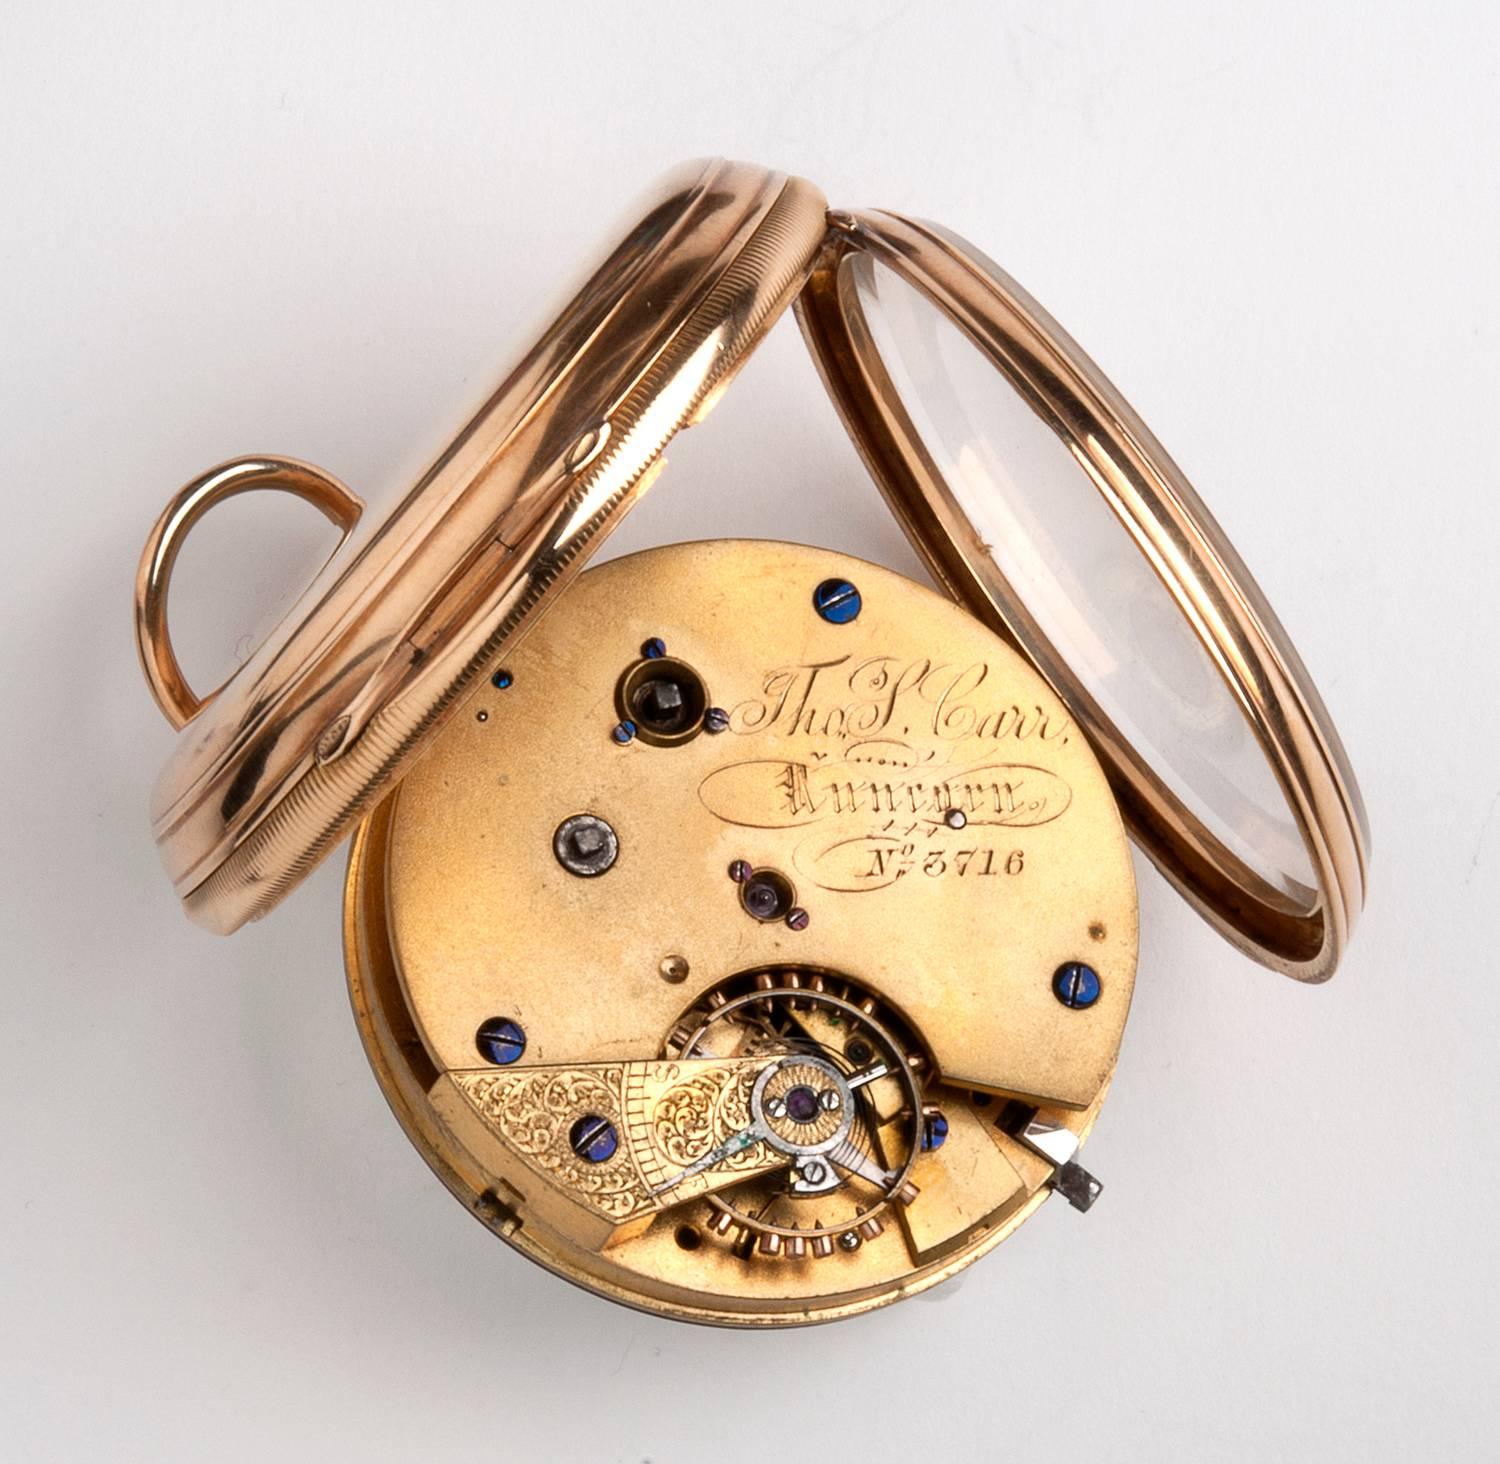 Solid 18K gold 1/5 centre seconds chronograph pocket watch - Thomas Carr, 1879-1880 London.
The white enamel dial with Roman numerals has a pair of black steel hands plus a centre chronograph hand. A slide activated and stops the movement. The watch